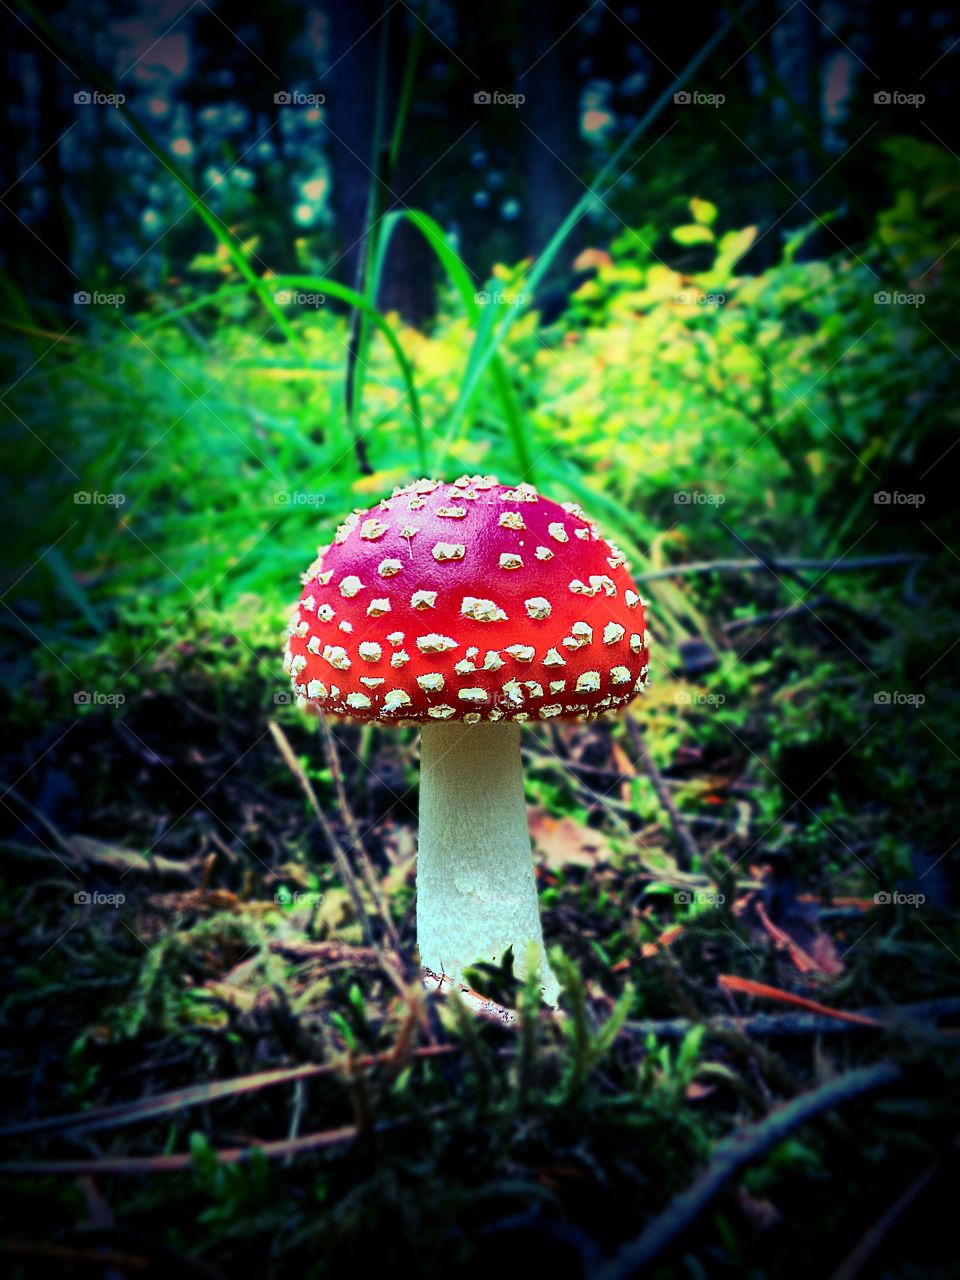 deadly, but nice. a little fly agaric